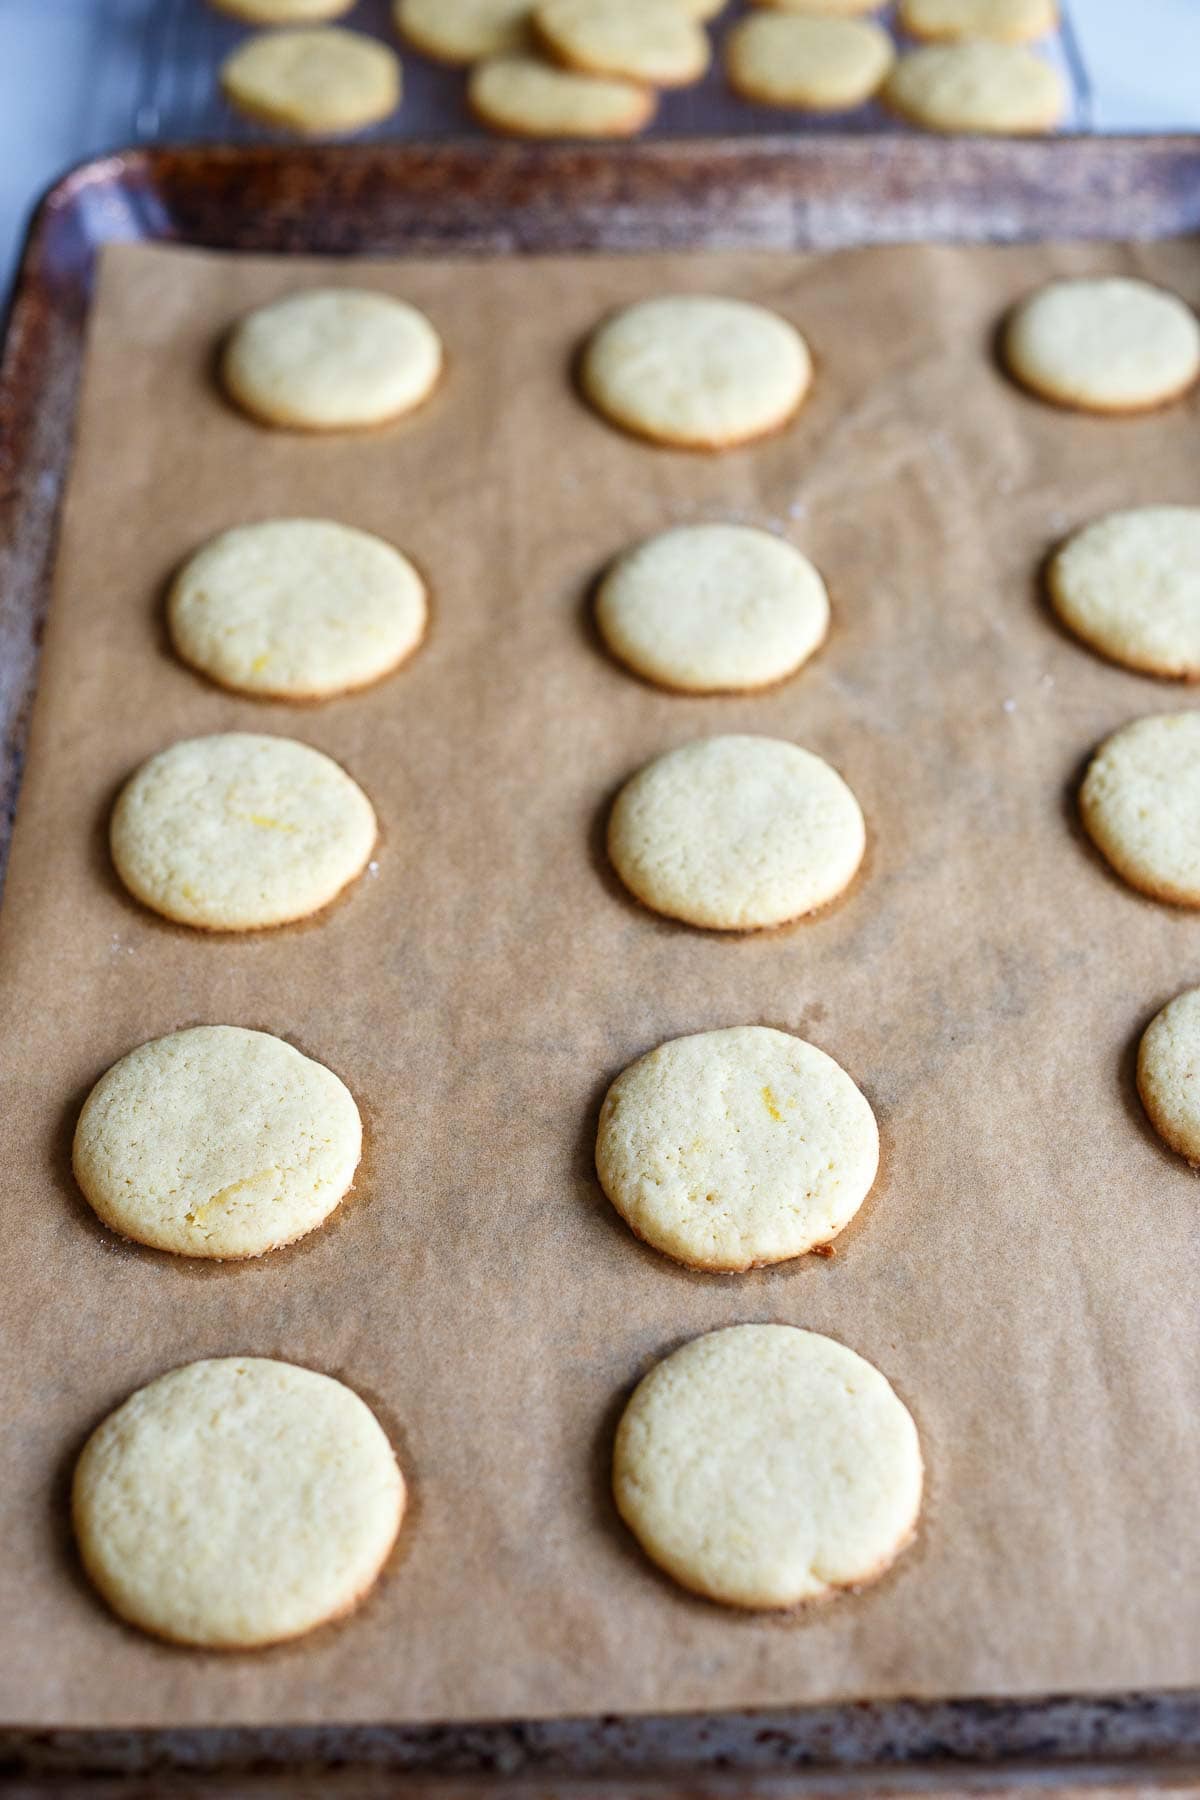 baked lemon cookies on parchment-lined baking sheet.